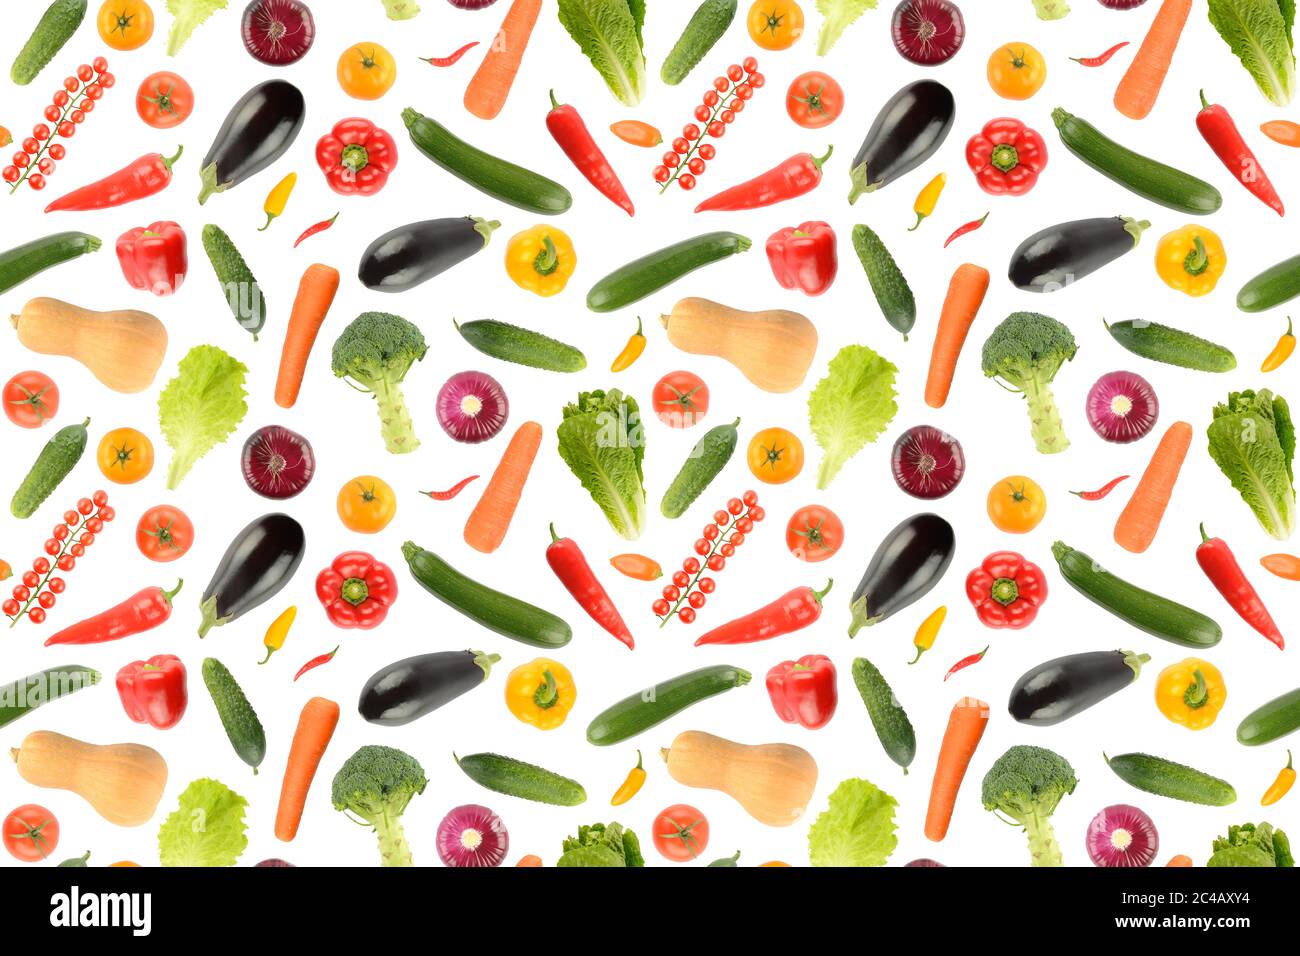 Seamless pattern various vegetables isolated on white background without shadow. Repeating texture Stock Photo